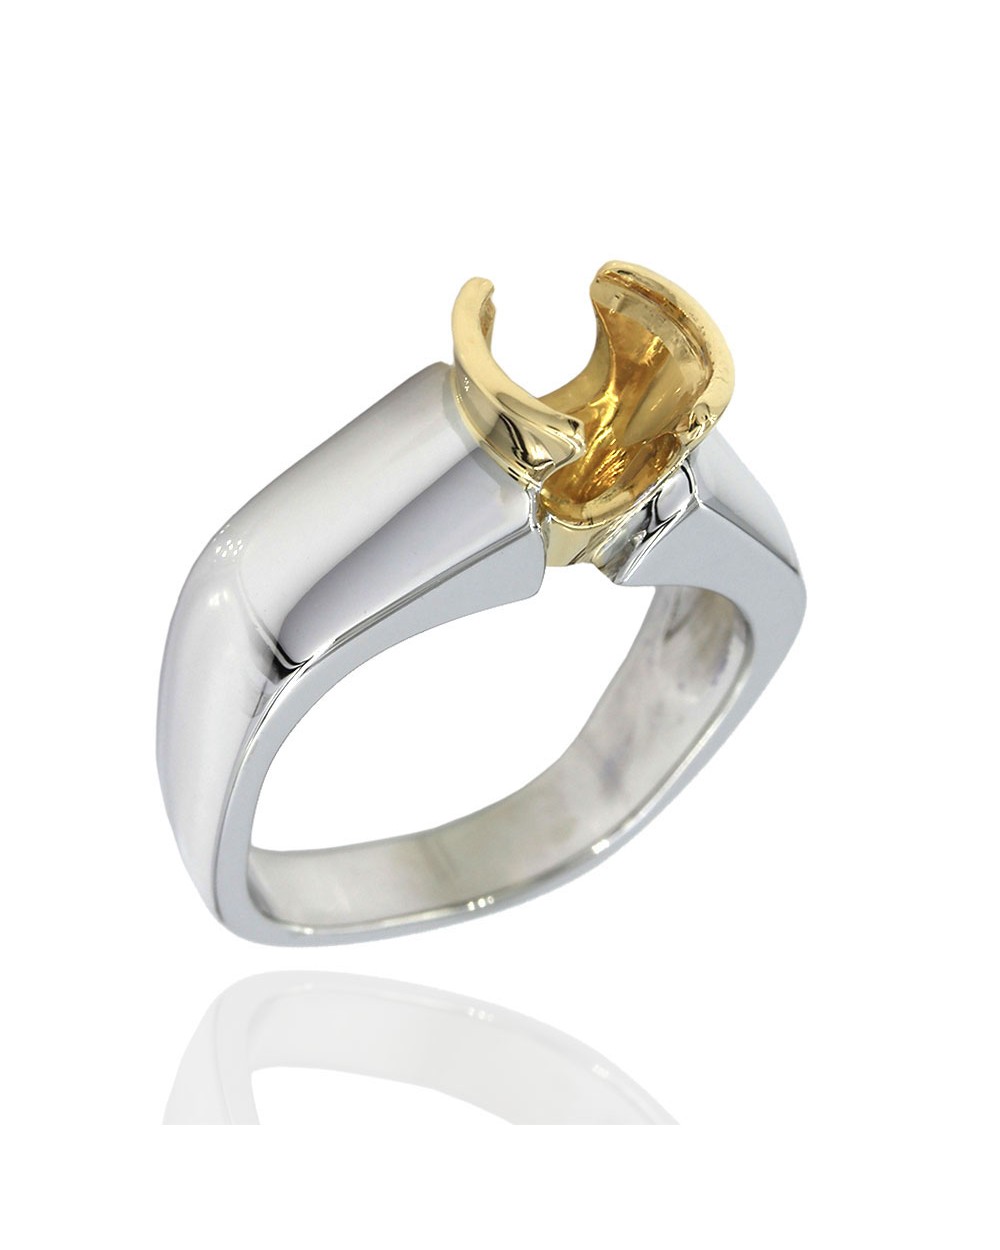 Two Tone Gold Solitaire Ring Mounting